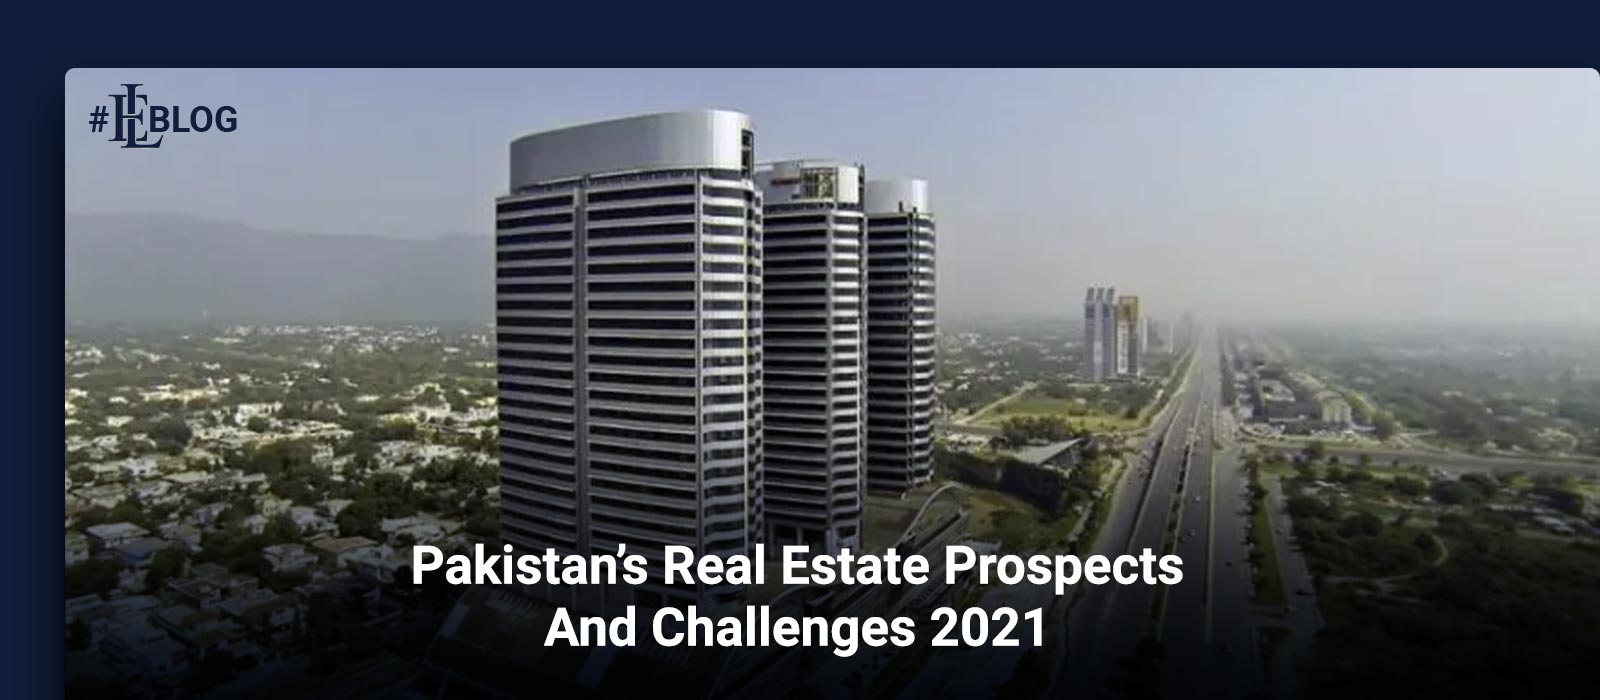 Pakistans Real Estate Prospects And Challenges 2021